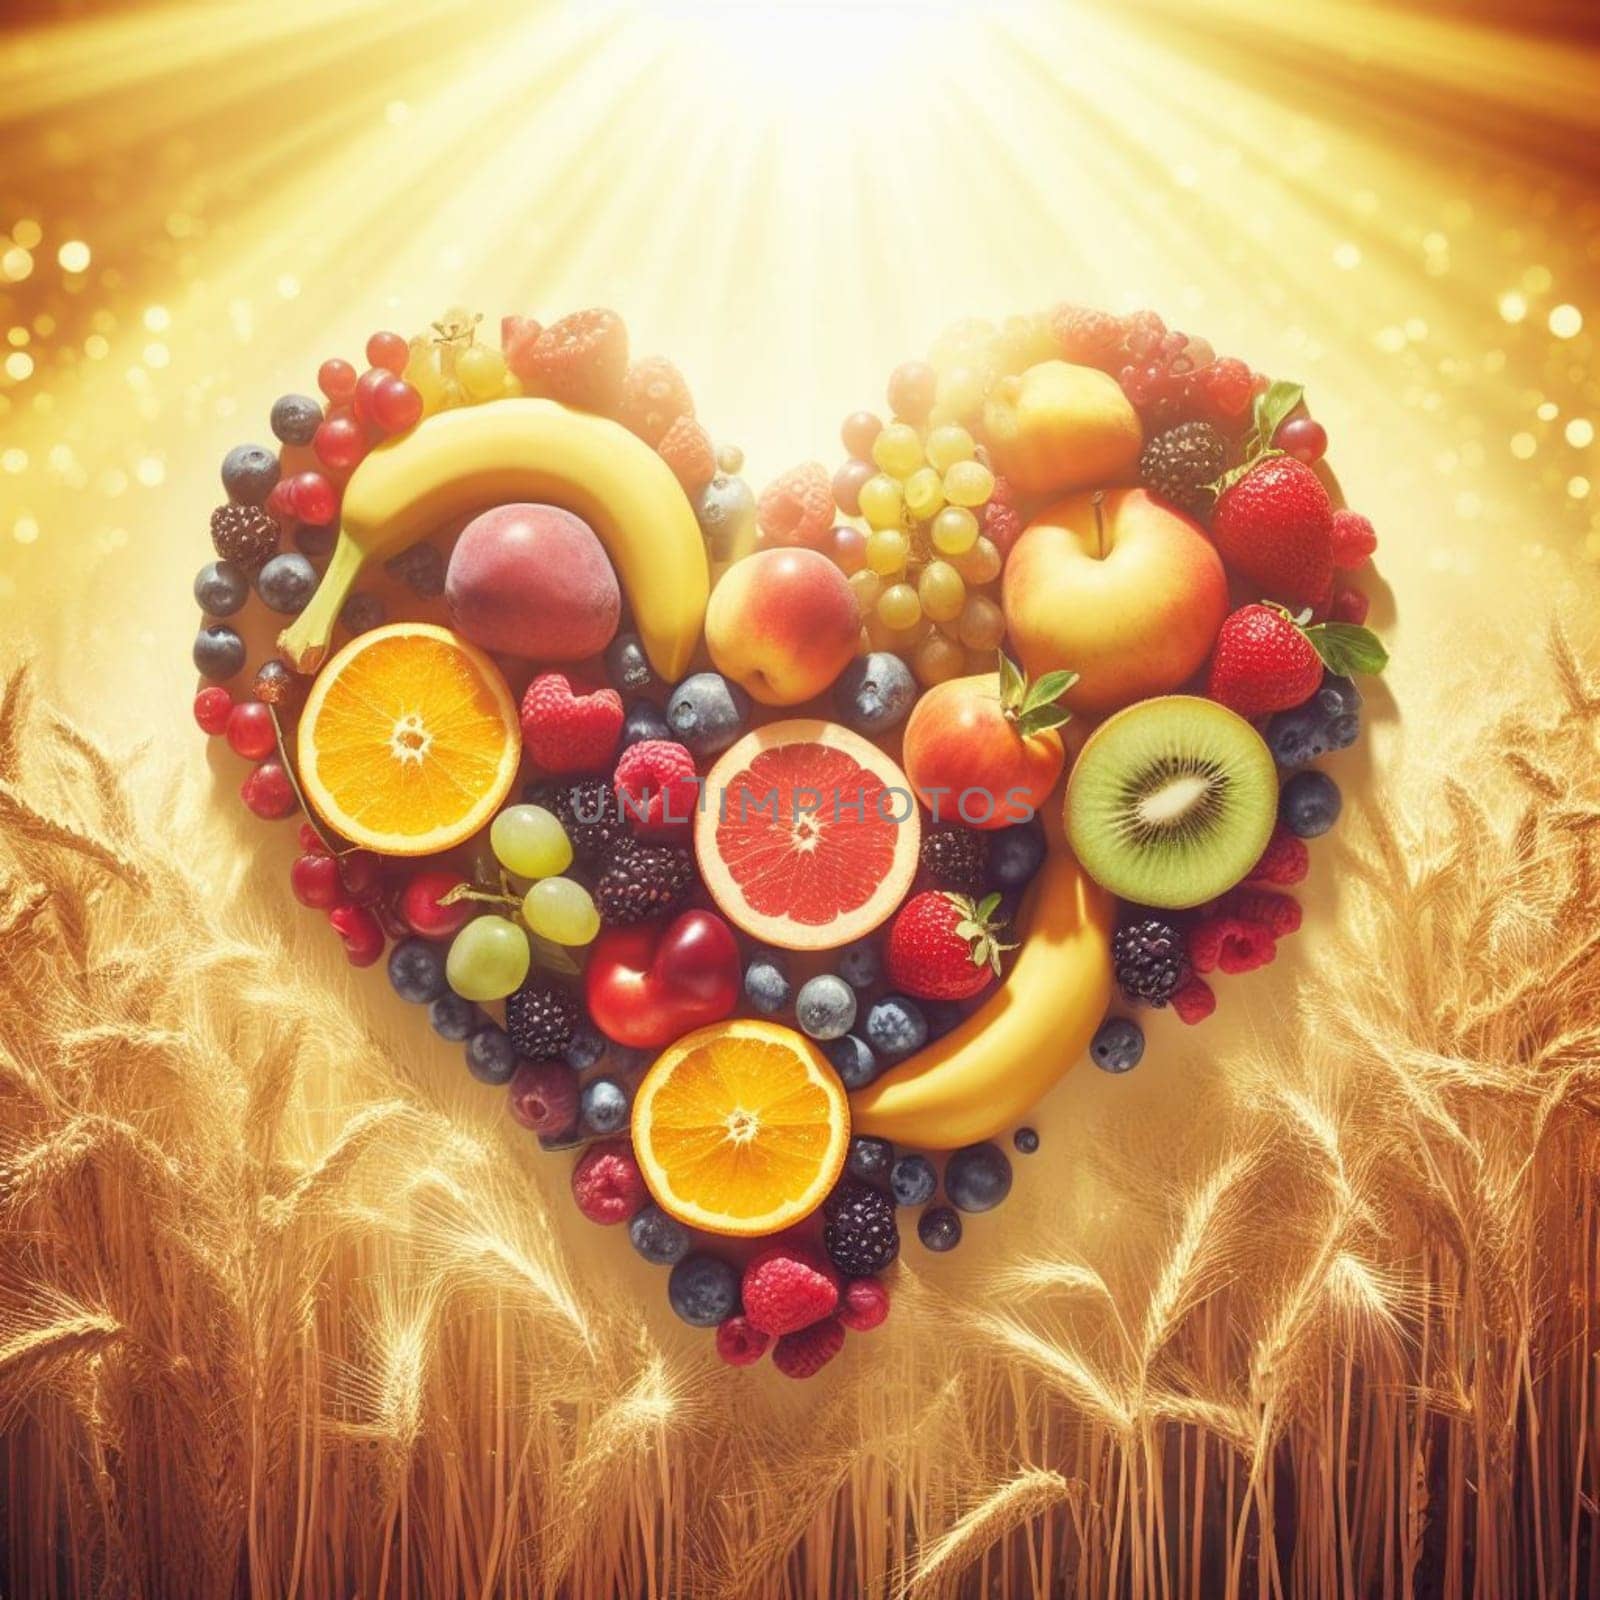 heart shaped collage of healthy fruit full of vitamins by verbano